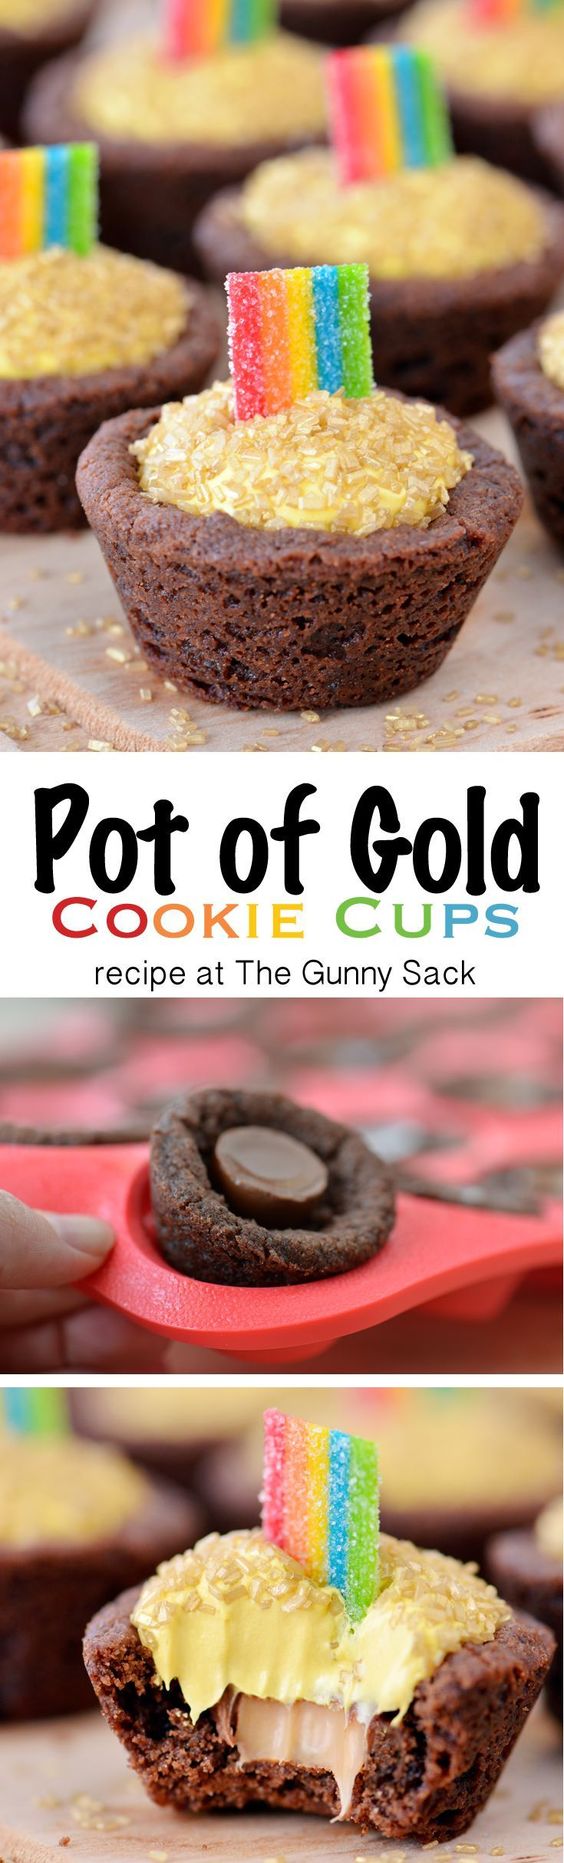 Pot of Gold Cookie Cups Recipe